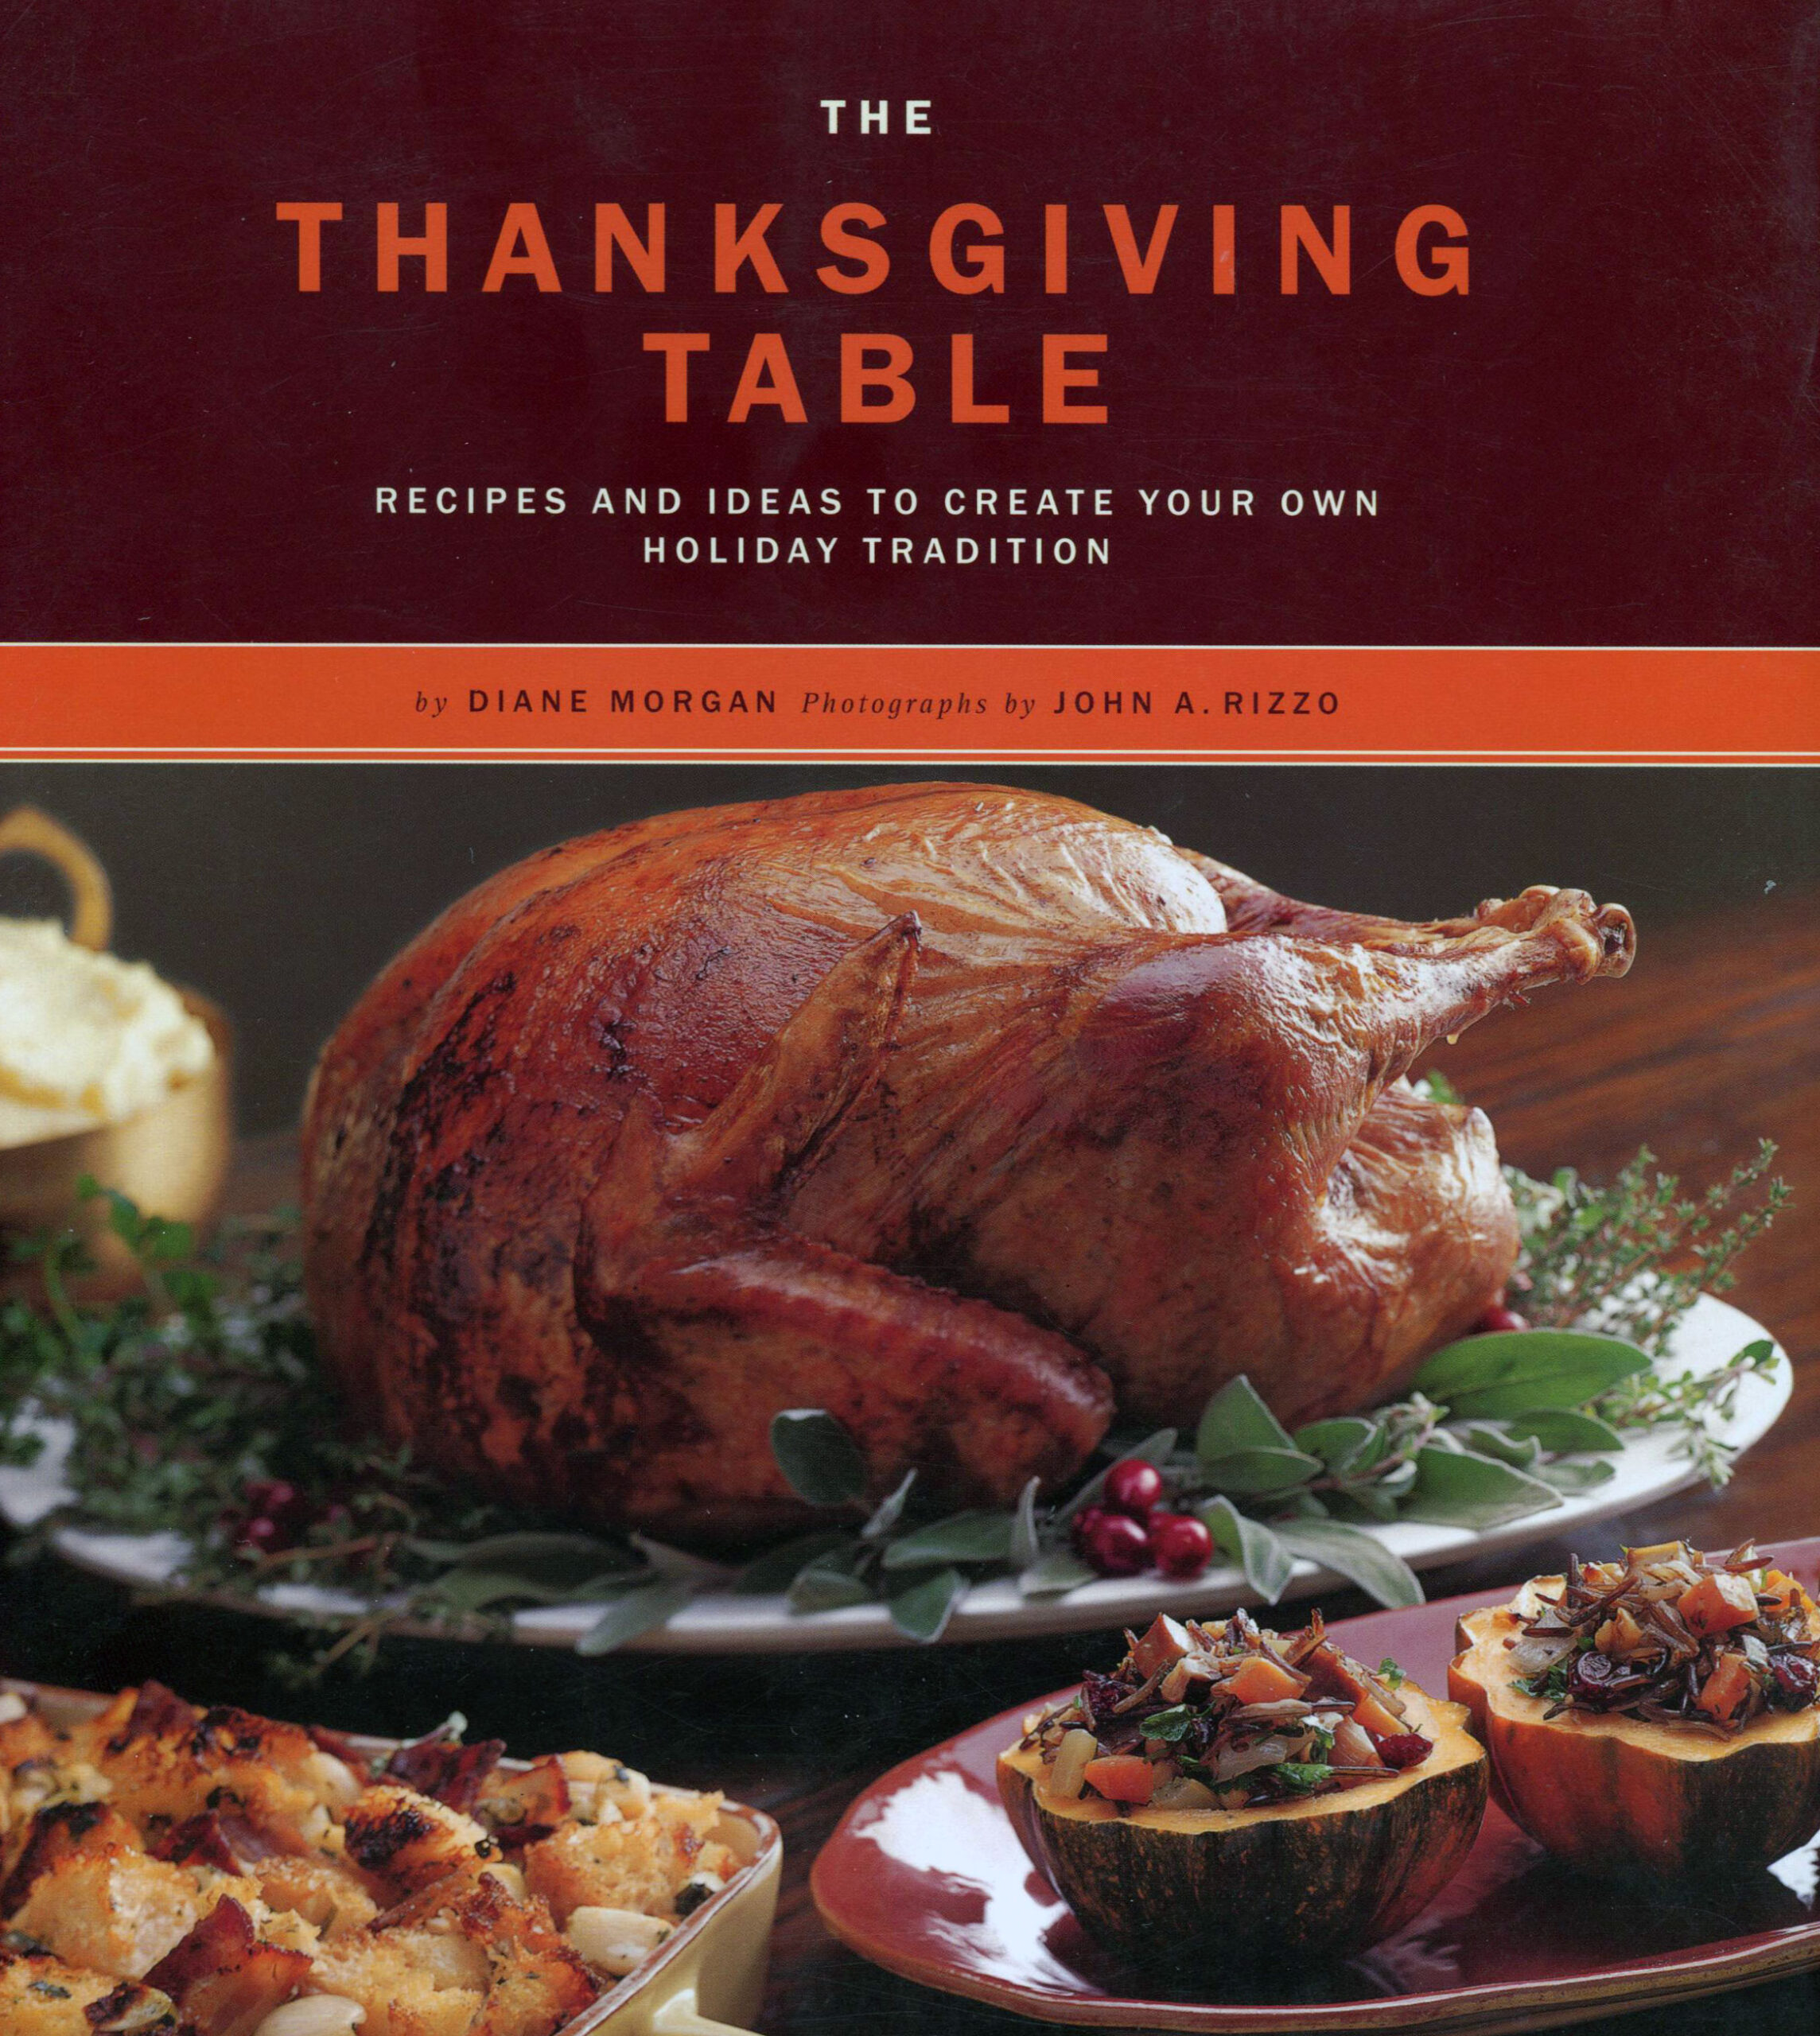 10 Cookbooks That'll Take The Stress Out Of Cooking Thanksgiving Dinner